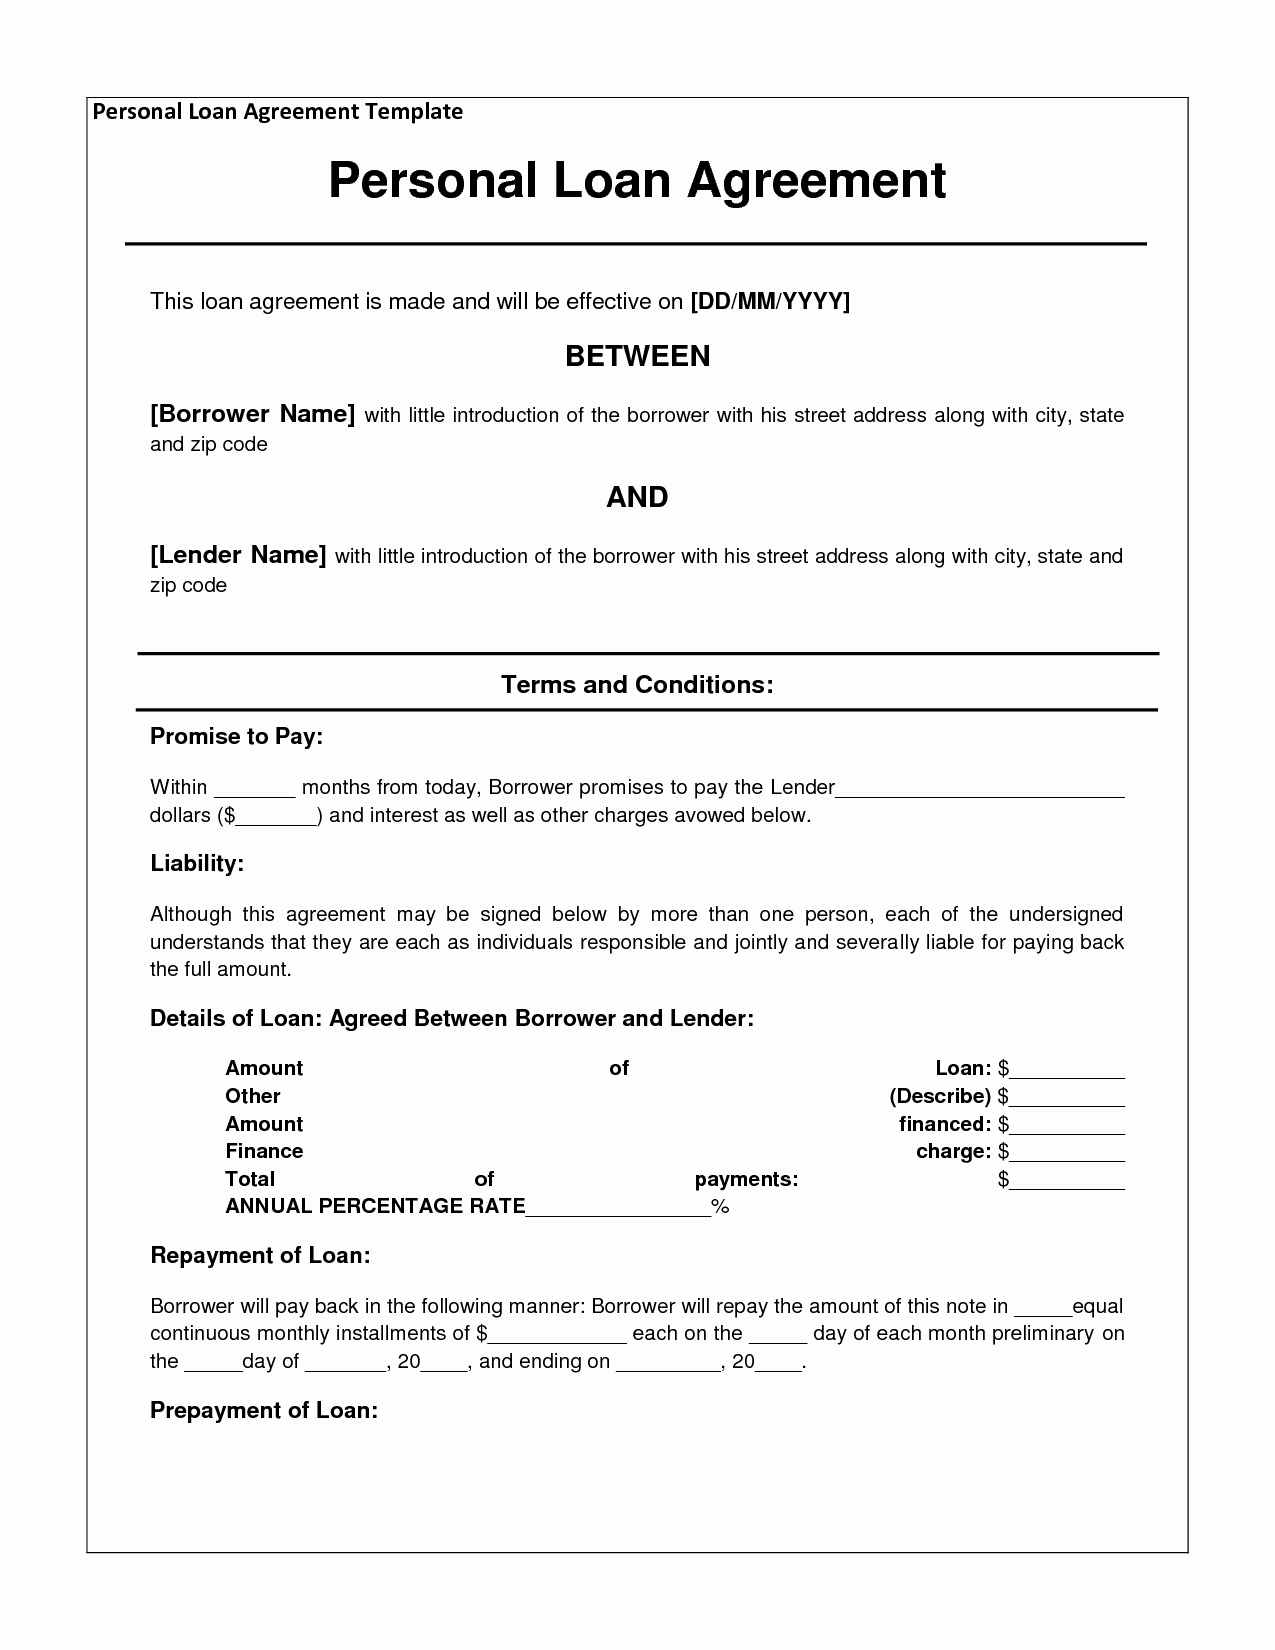 Personal Loan Agreement Template Unique 14 Loan Agreement Templates Excel Pdf formats